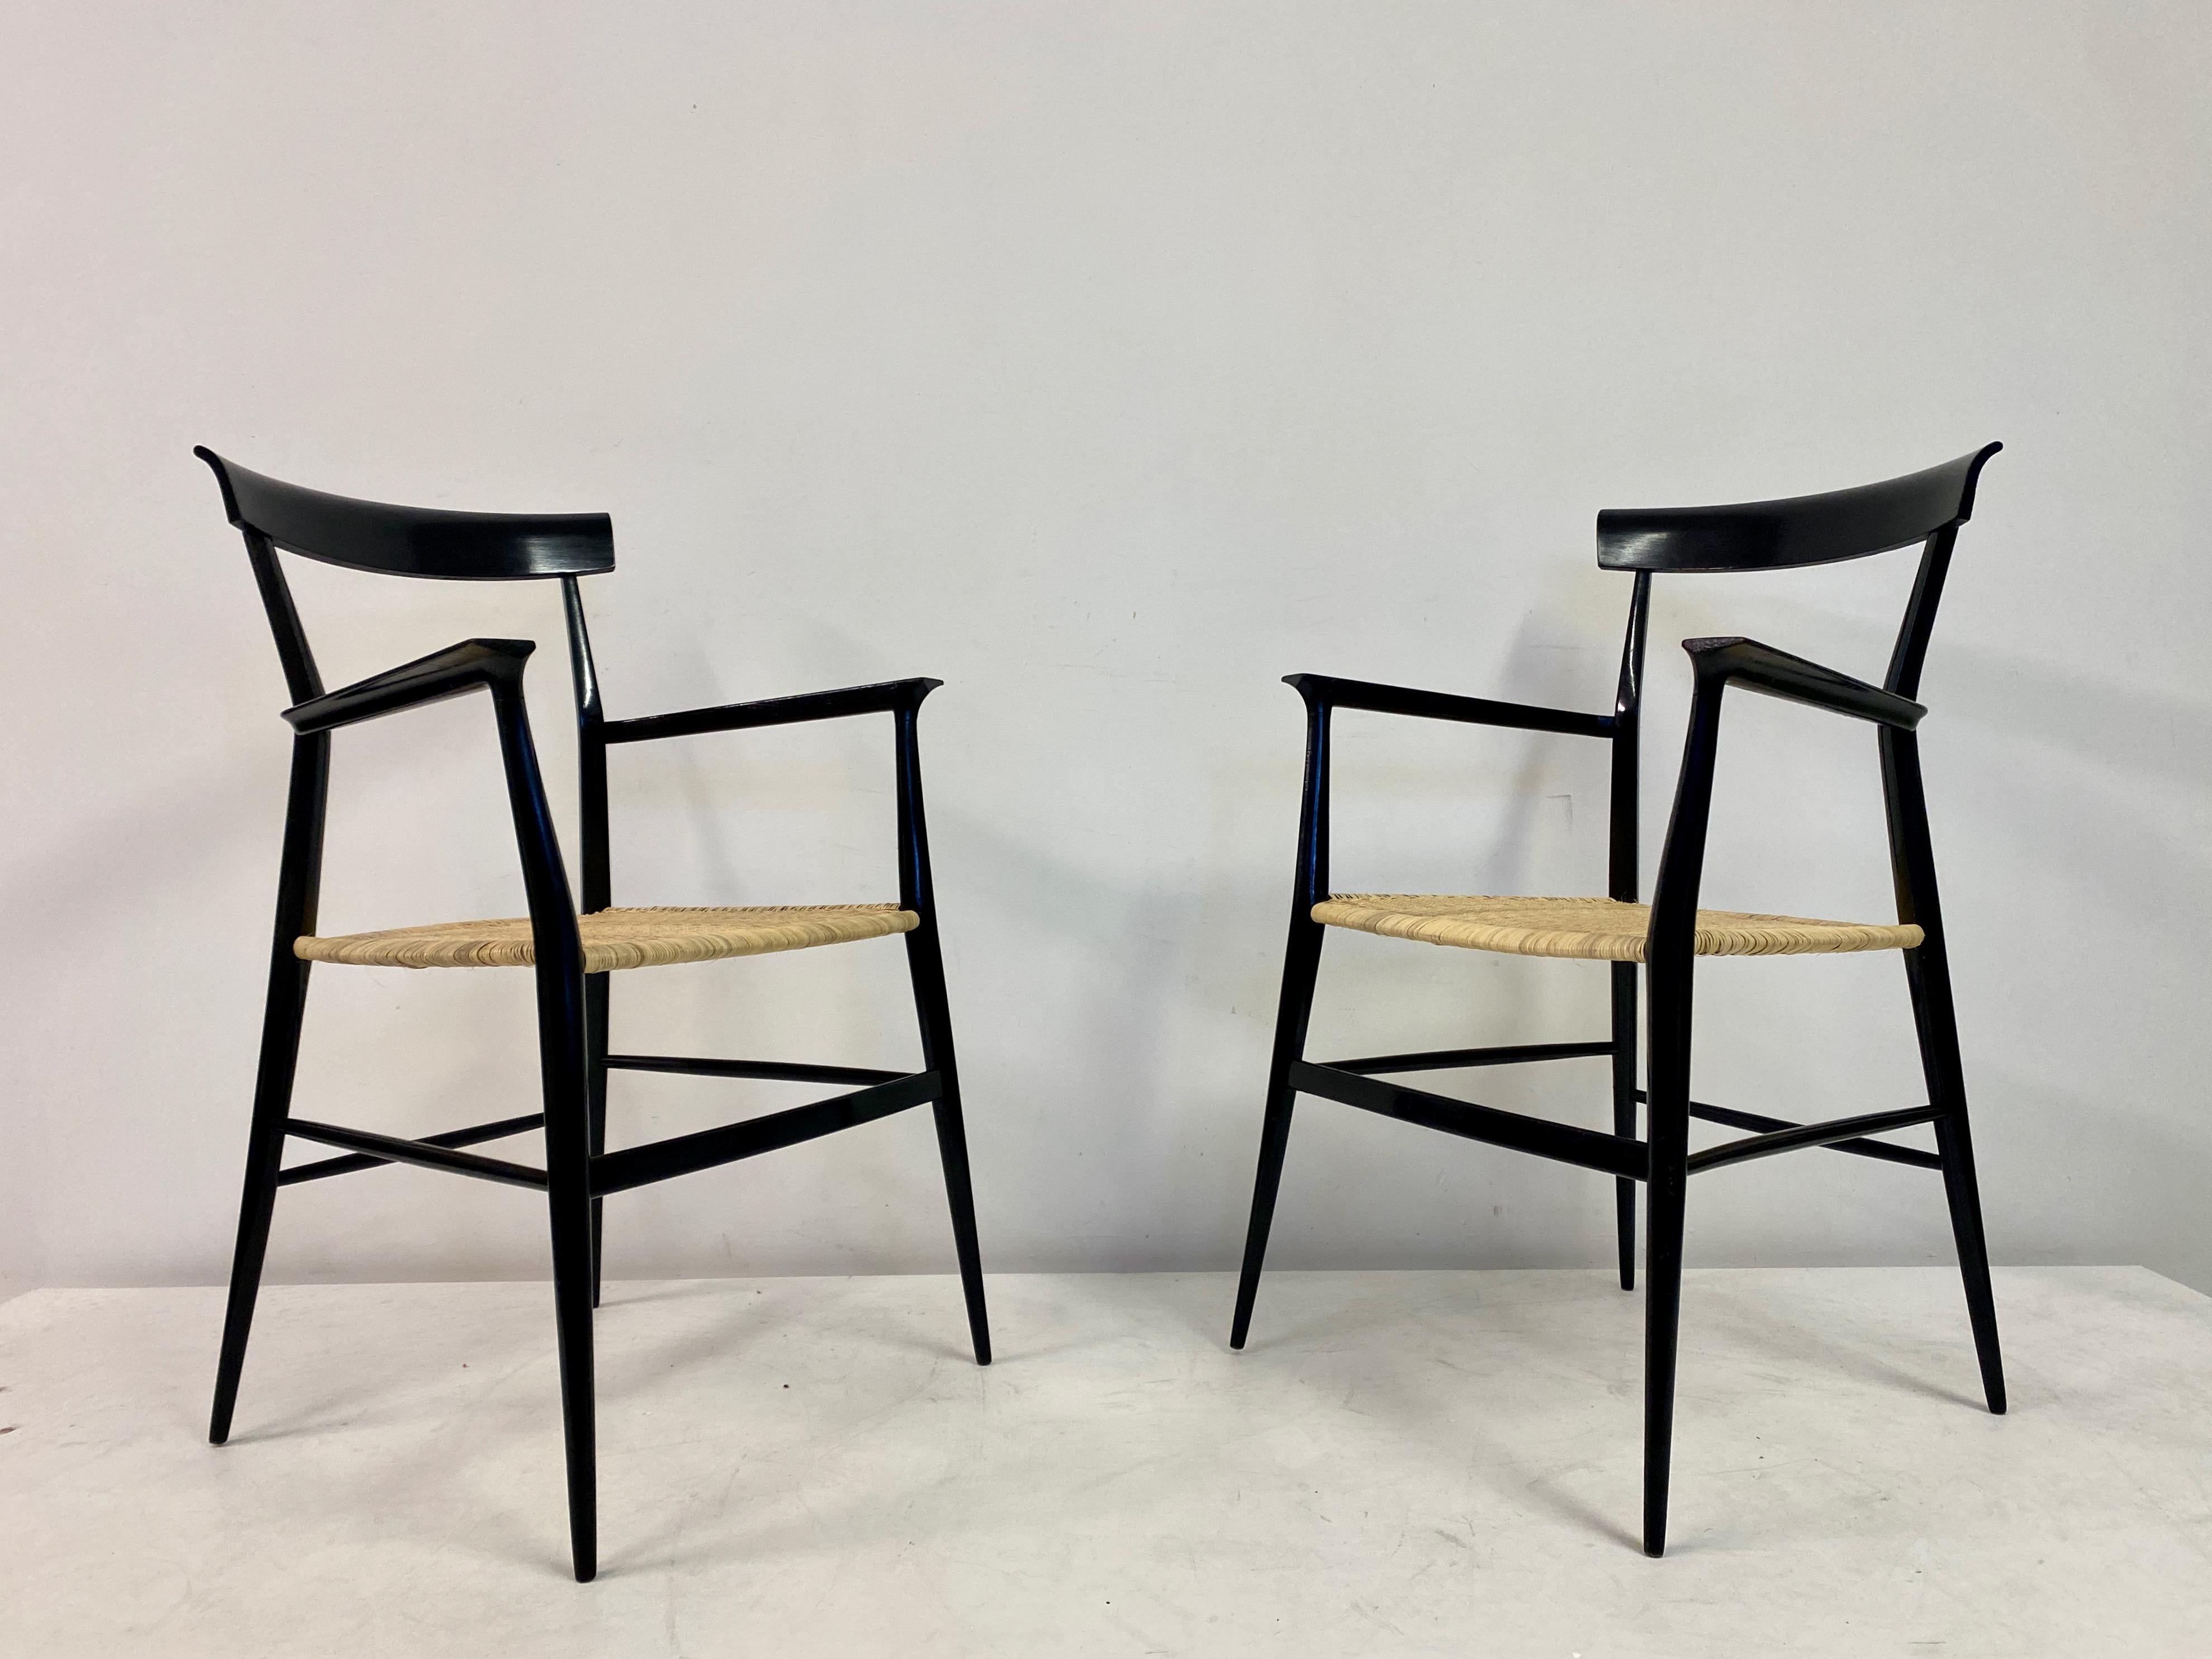 Pair of 1950s Tigullina Chairs by Colombo Sanguineti For Sale 2